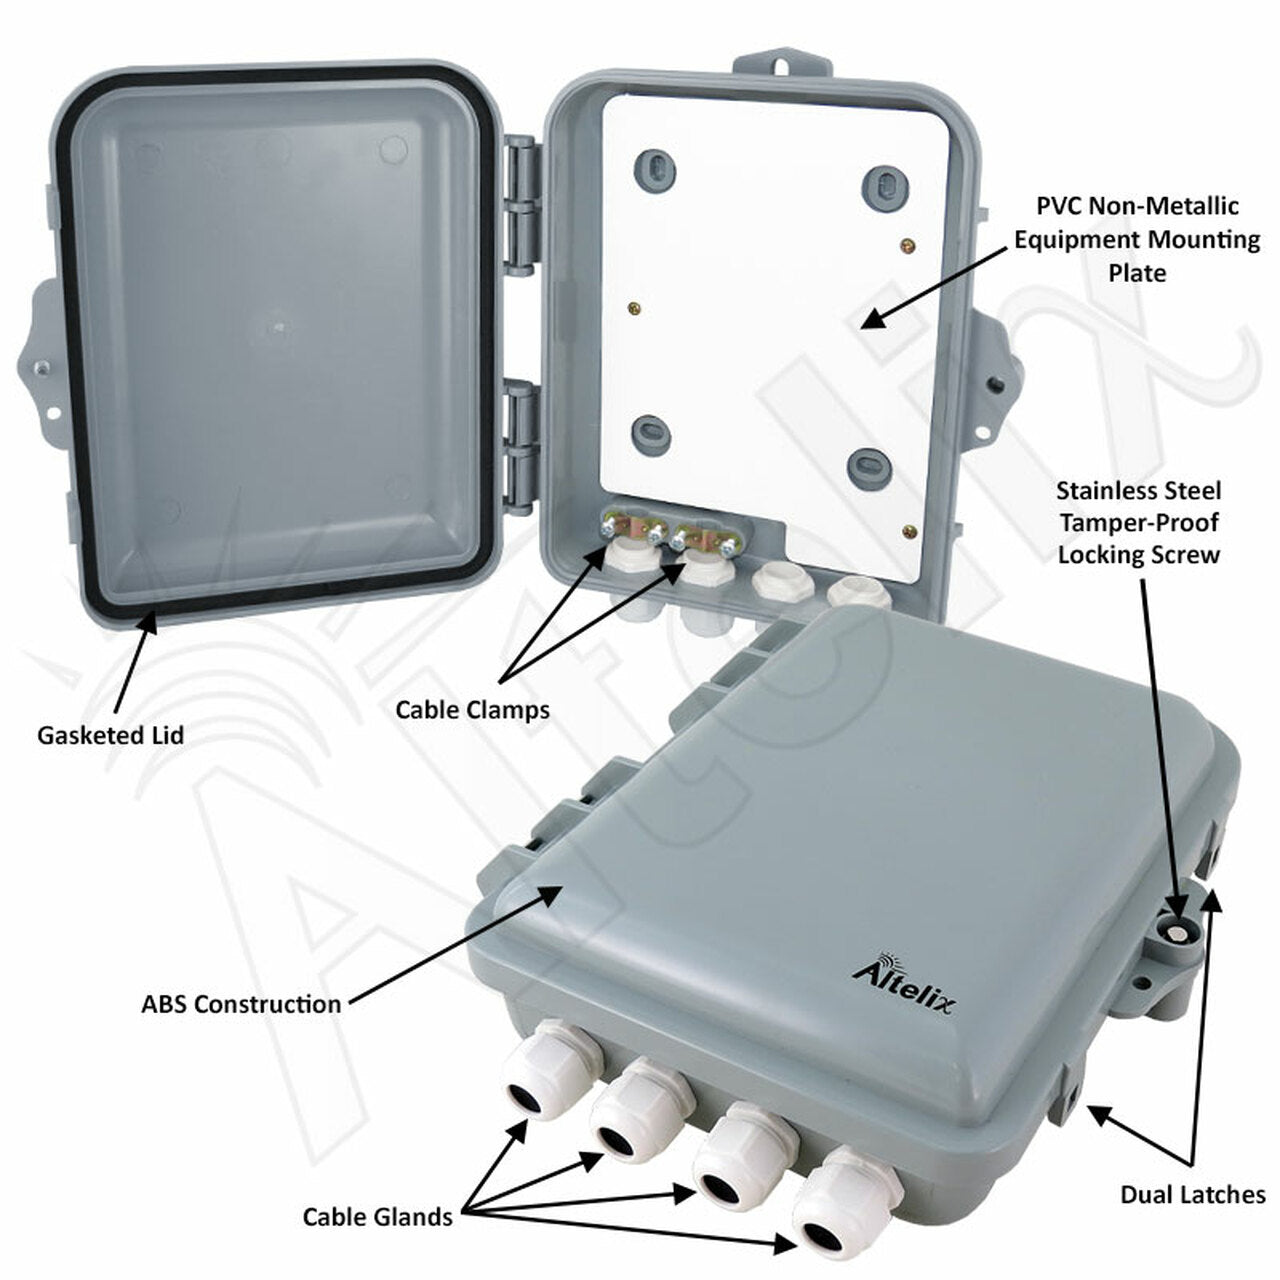 Altelix 9x8x3 IP66 NEMA 4X PC+ABS Indoor / Outdoor RF Transparent WiFi Access Point Enclosure with PVC Non-Metallic Equipment Mounting Plate - 0